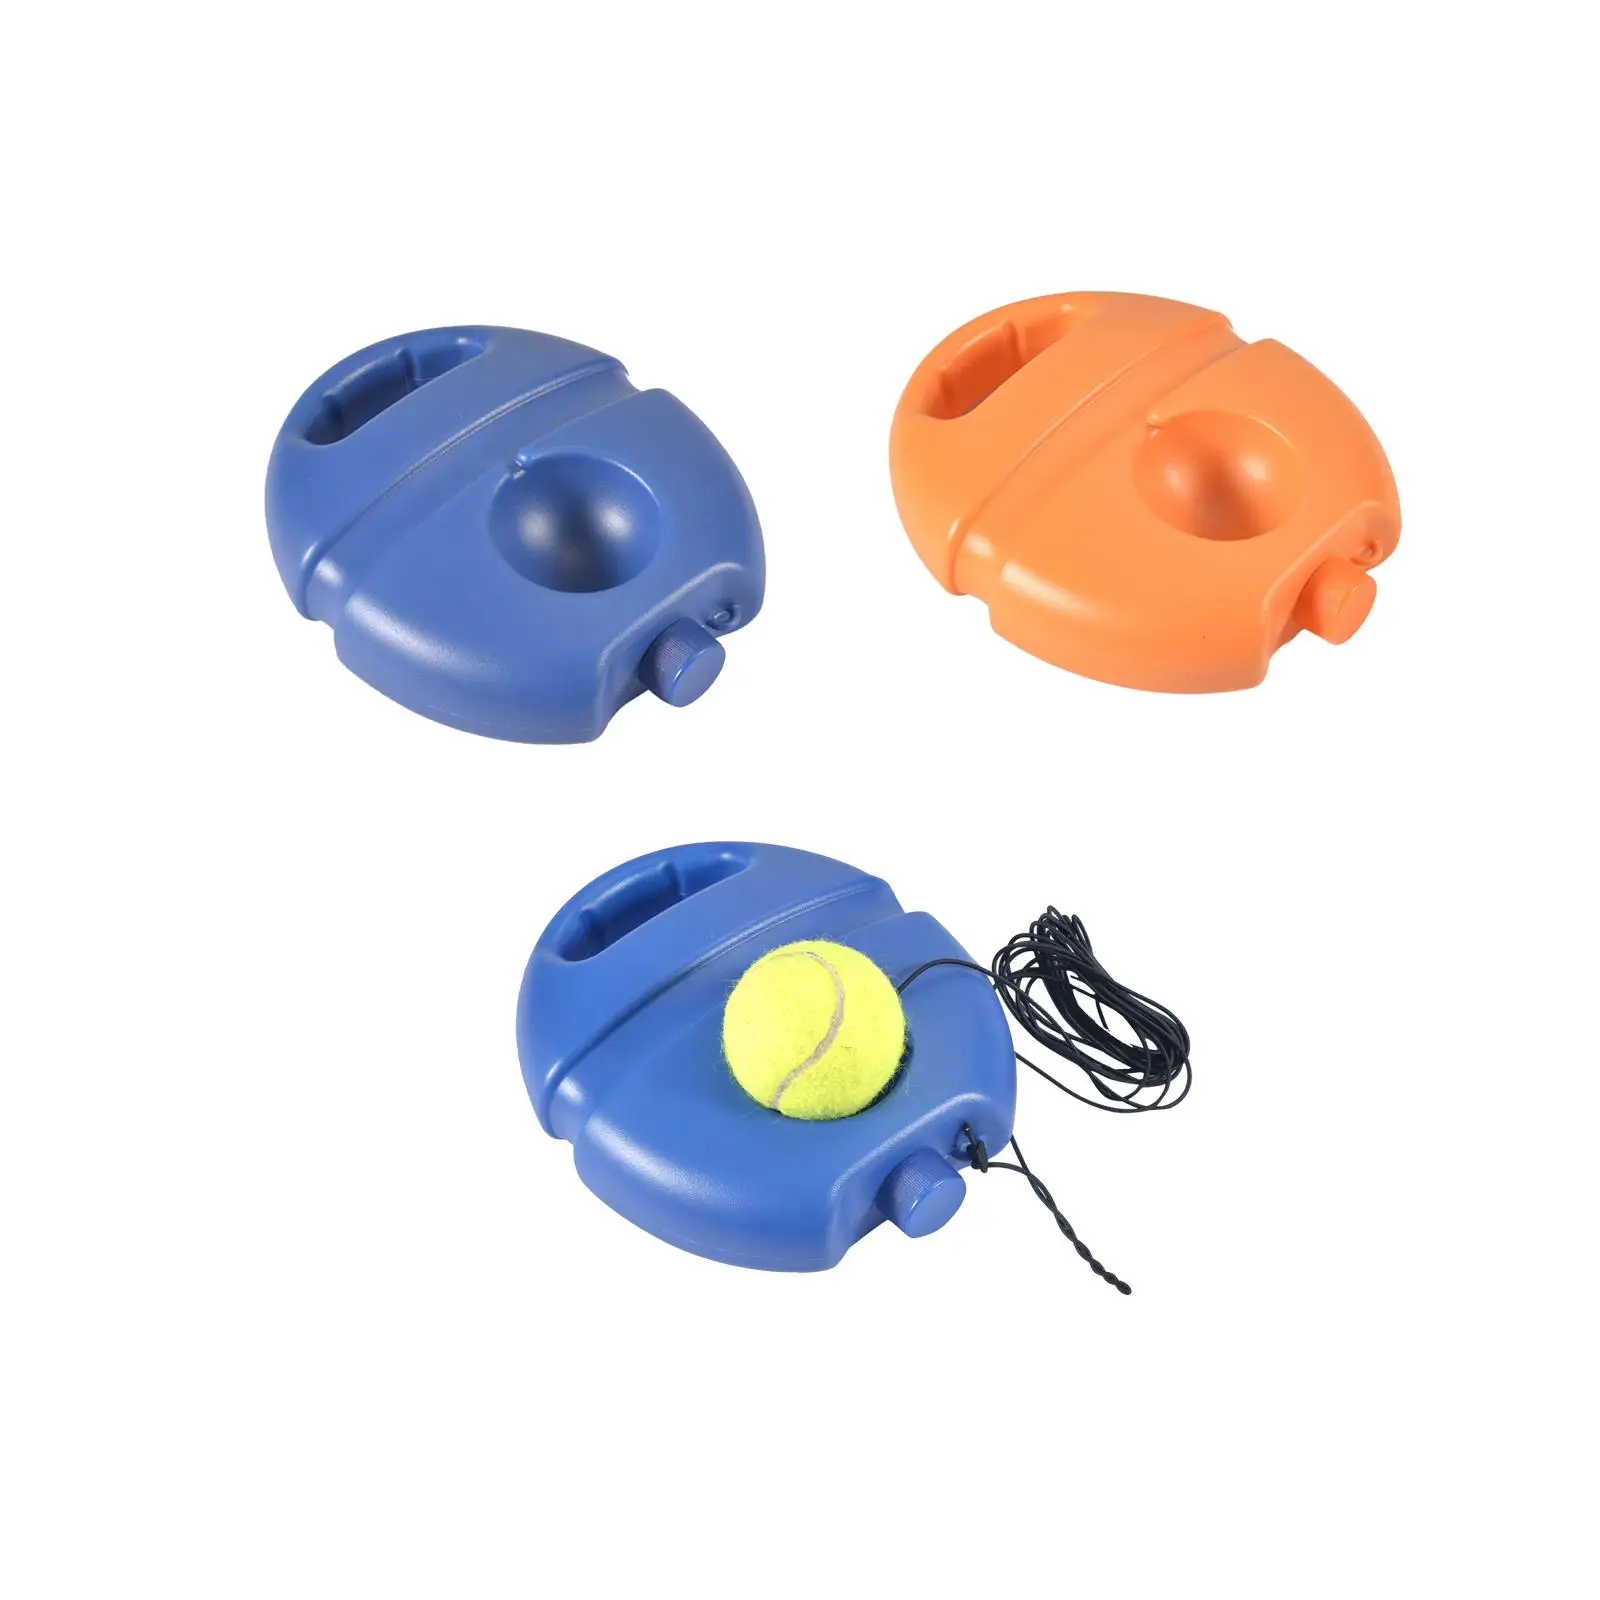 Tennis Trainer Base Professional Single Player Tennis Trainer for Kids Adults Beginners Practice Exercise Tool Sports Outdoor